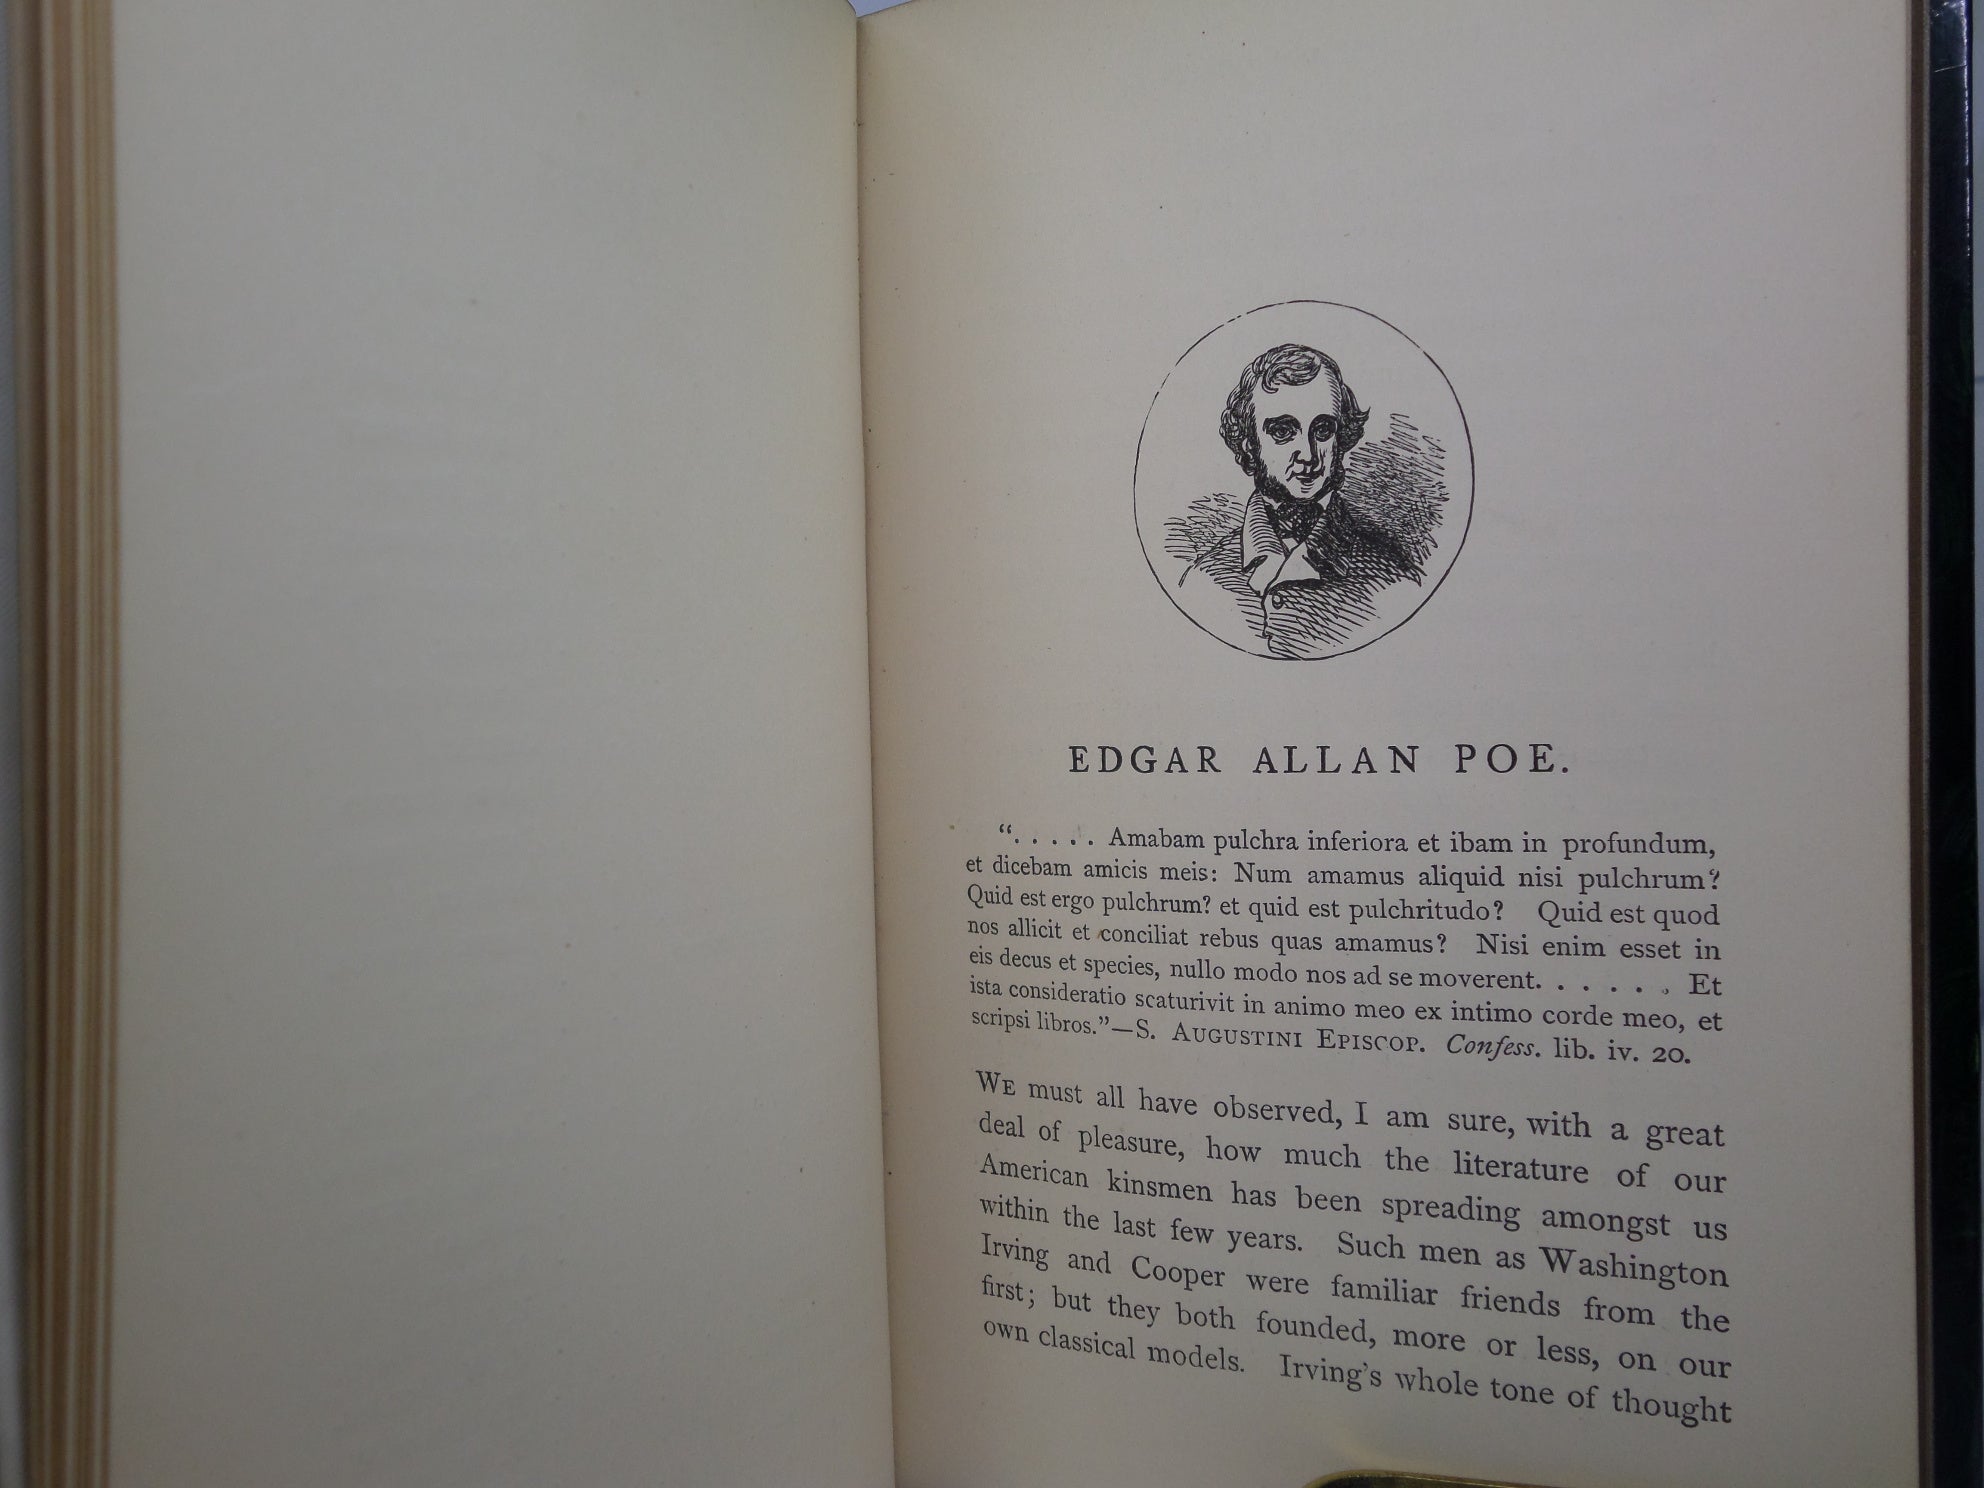 THE POETICAL WORKS OF EDGAR ALLAN POE 1852 COMPLETE EDITION - DELUXE BINDING